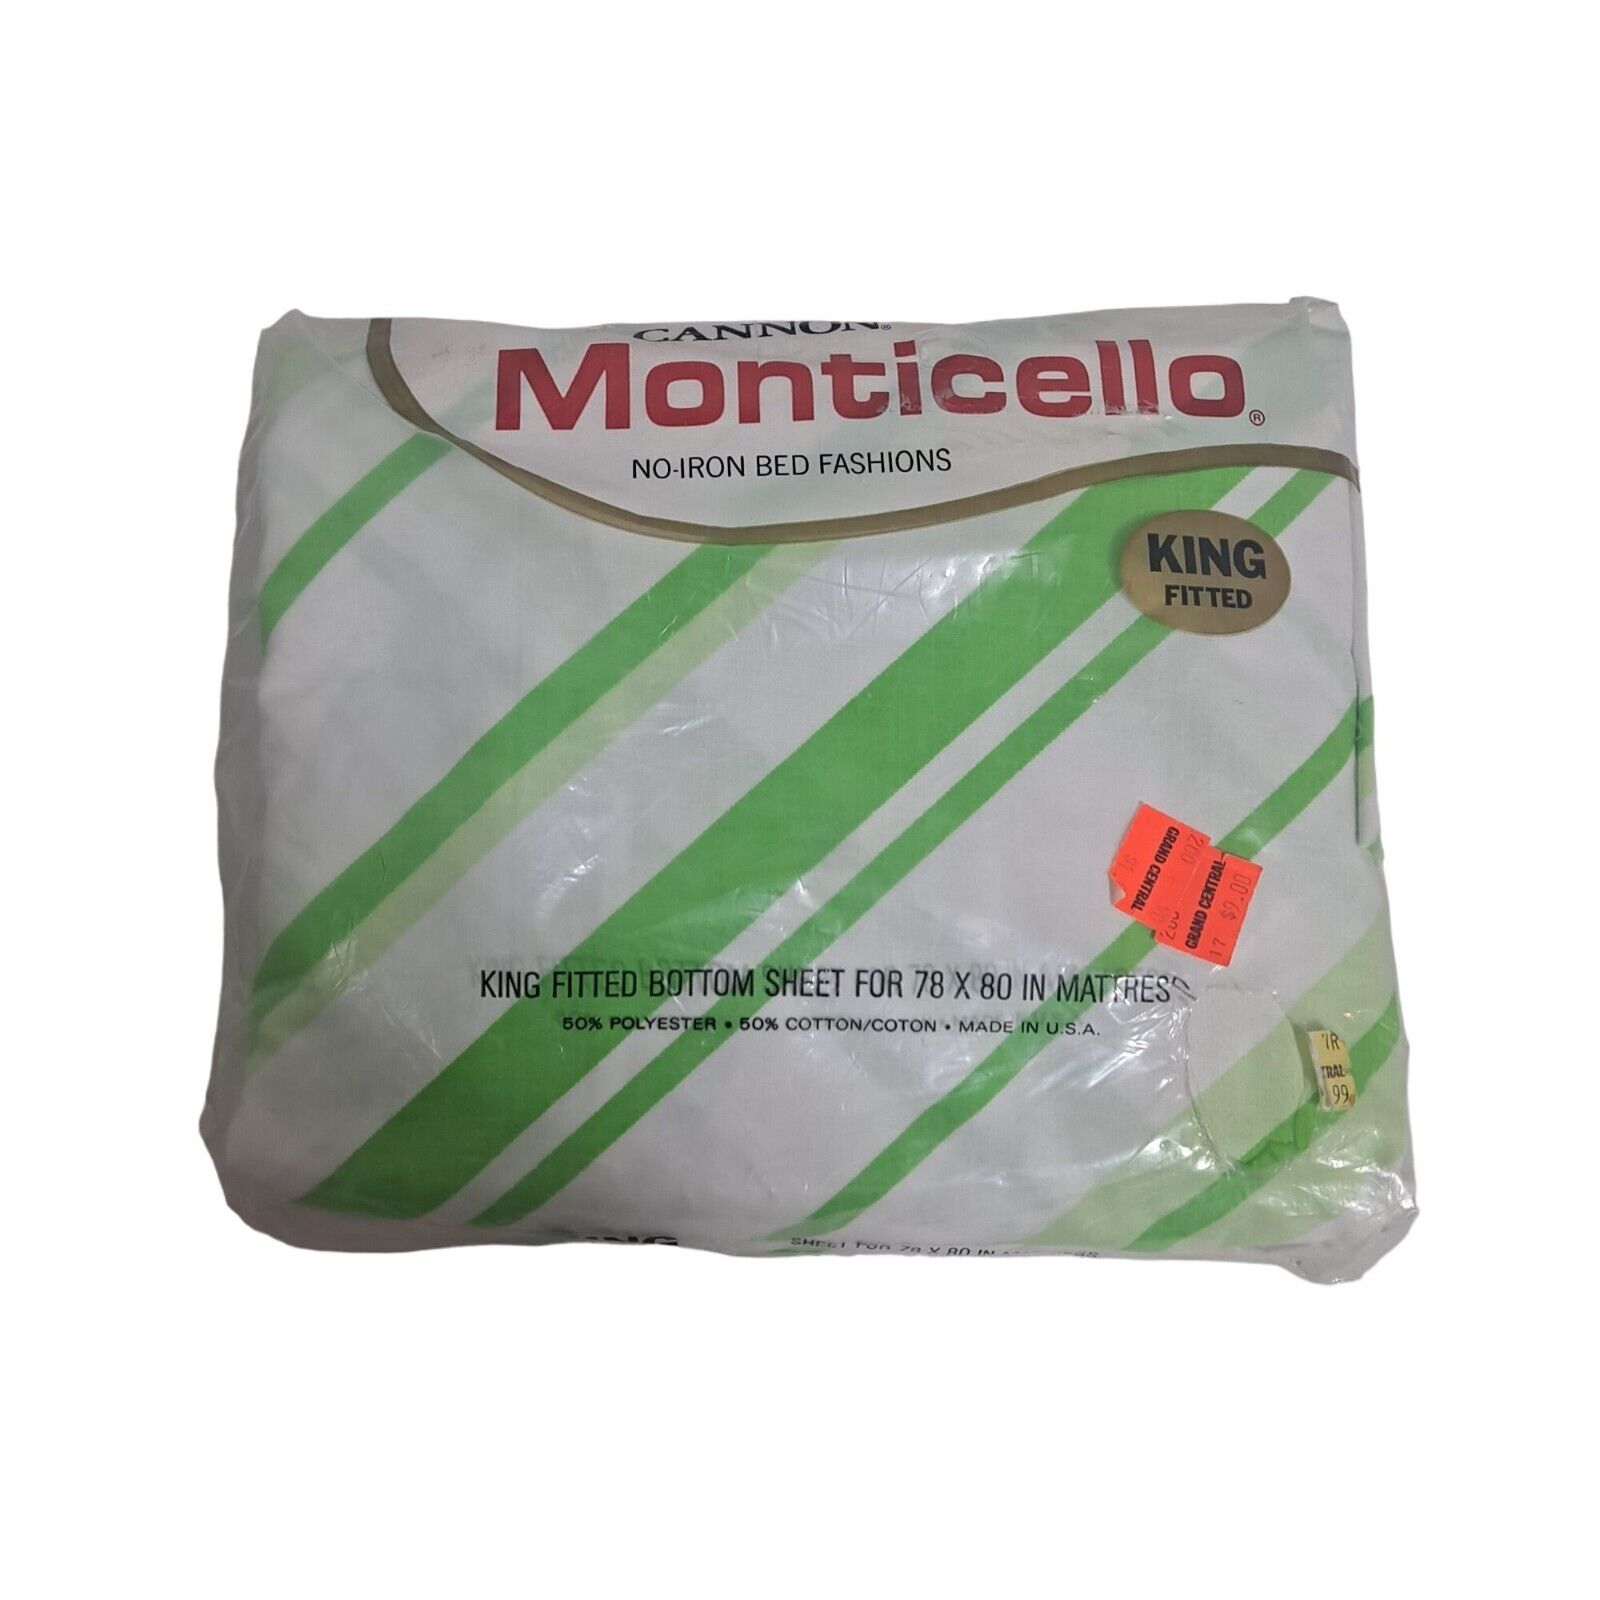 Vintage Cannon Monticello Sheet King Fitted Striped Green White NEW Old Stock